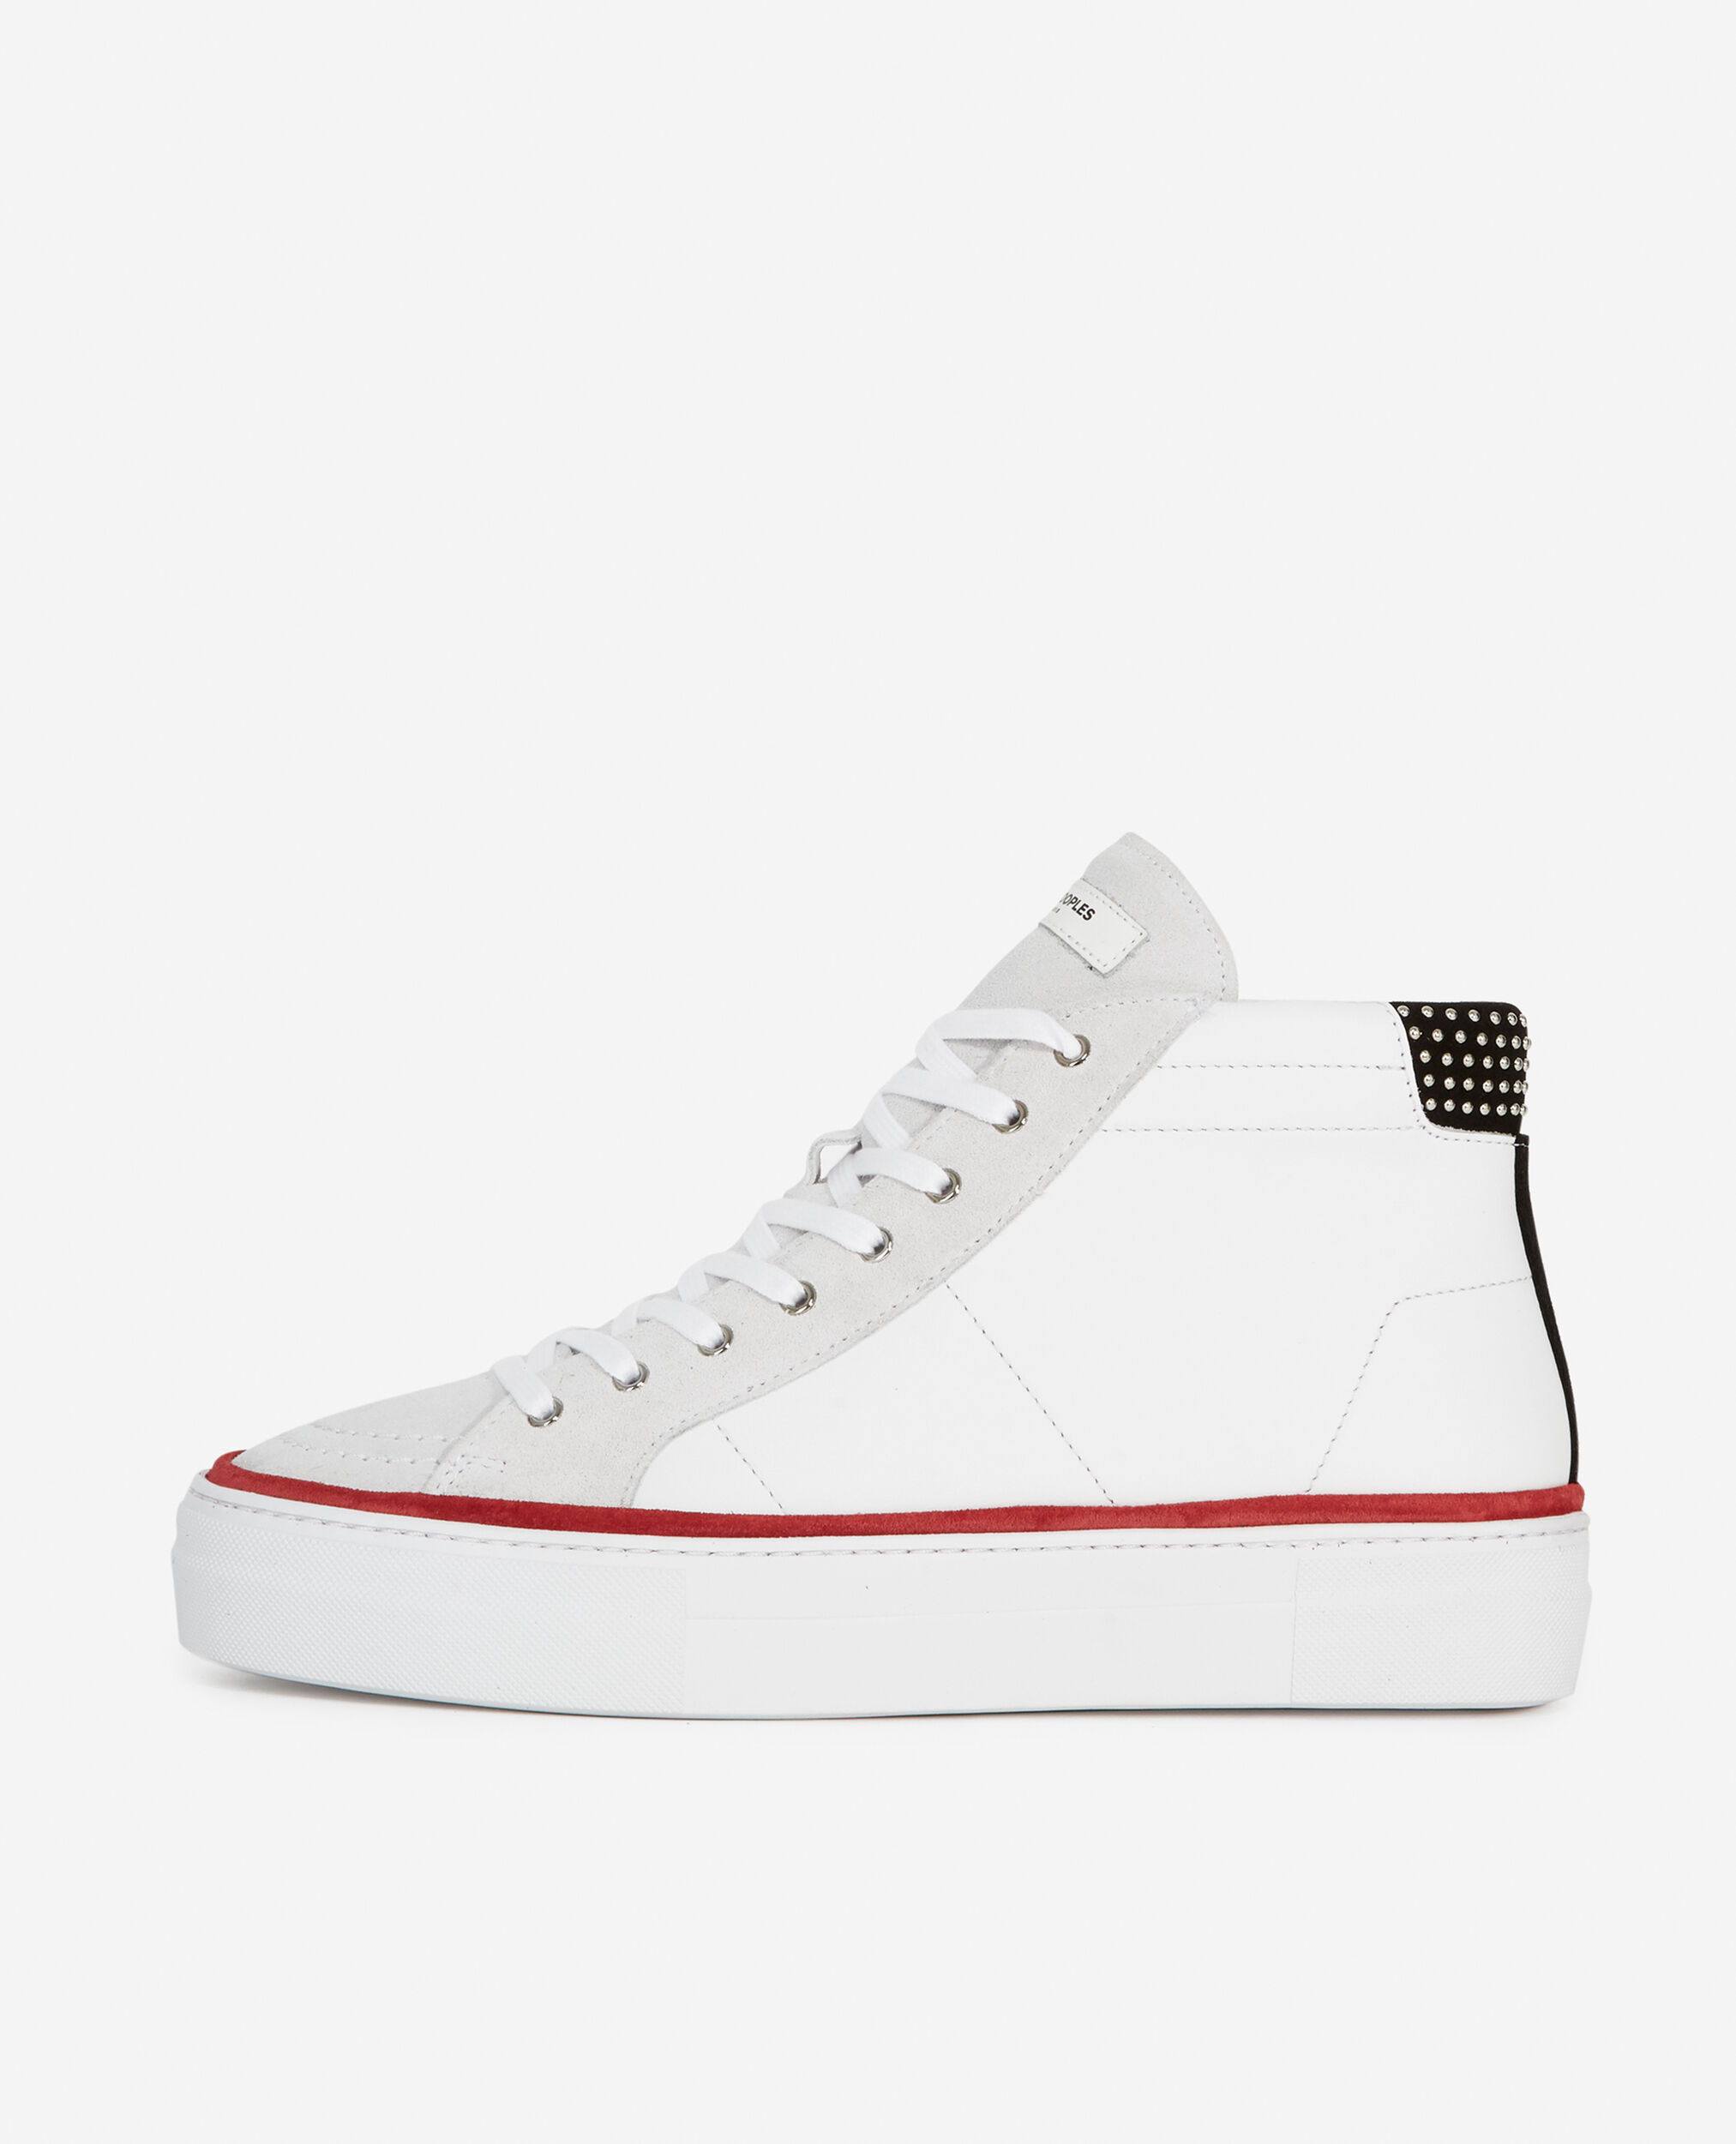 White leather sneakers with colored details, WHITE / GREY / RED, hi-res image number null